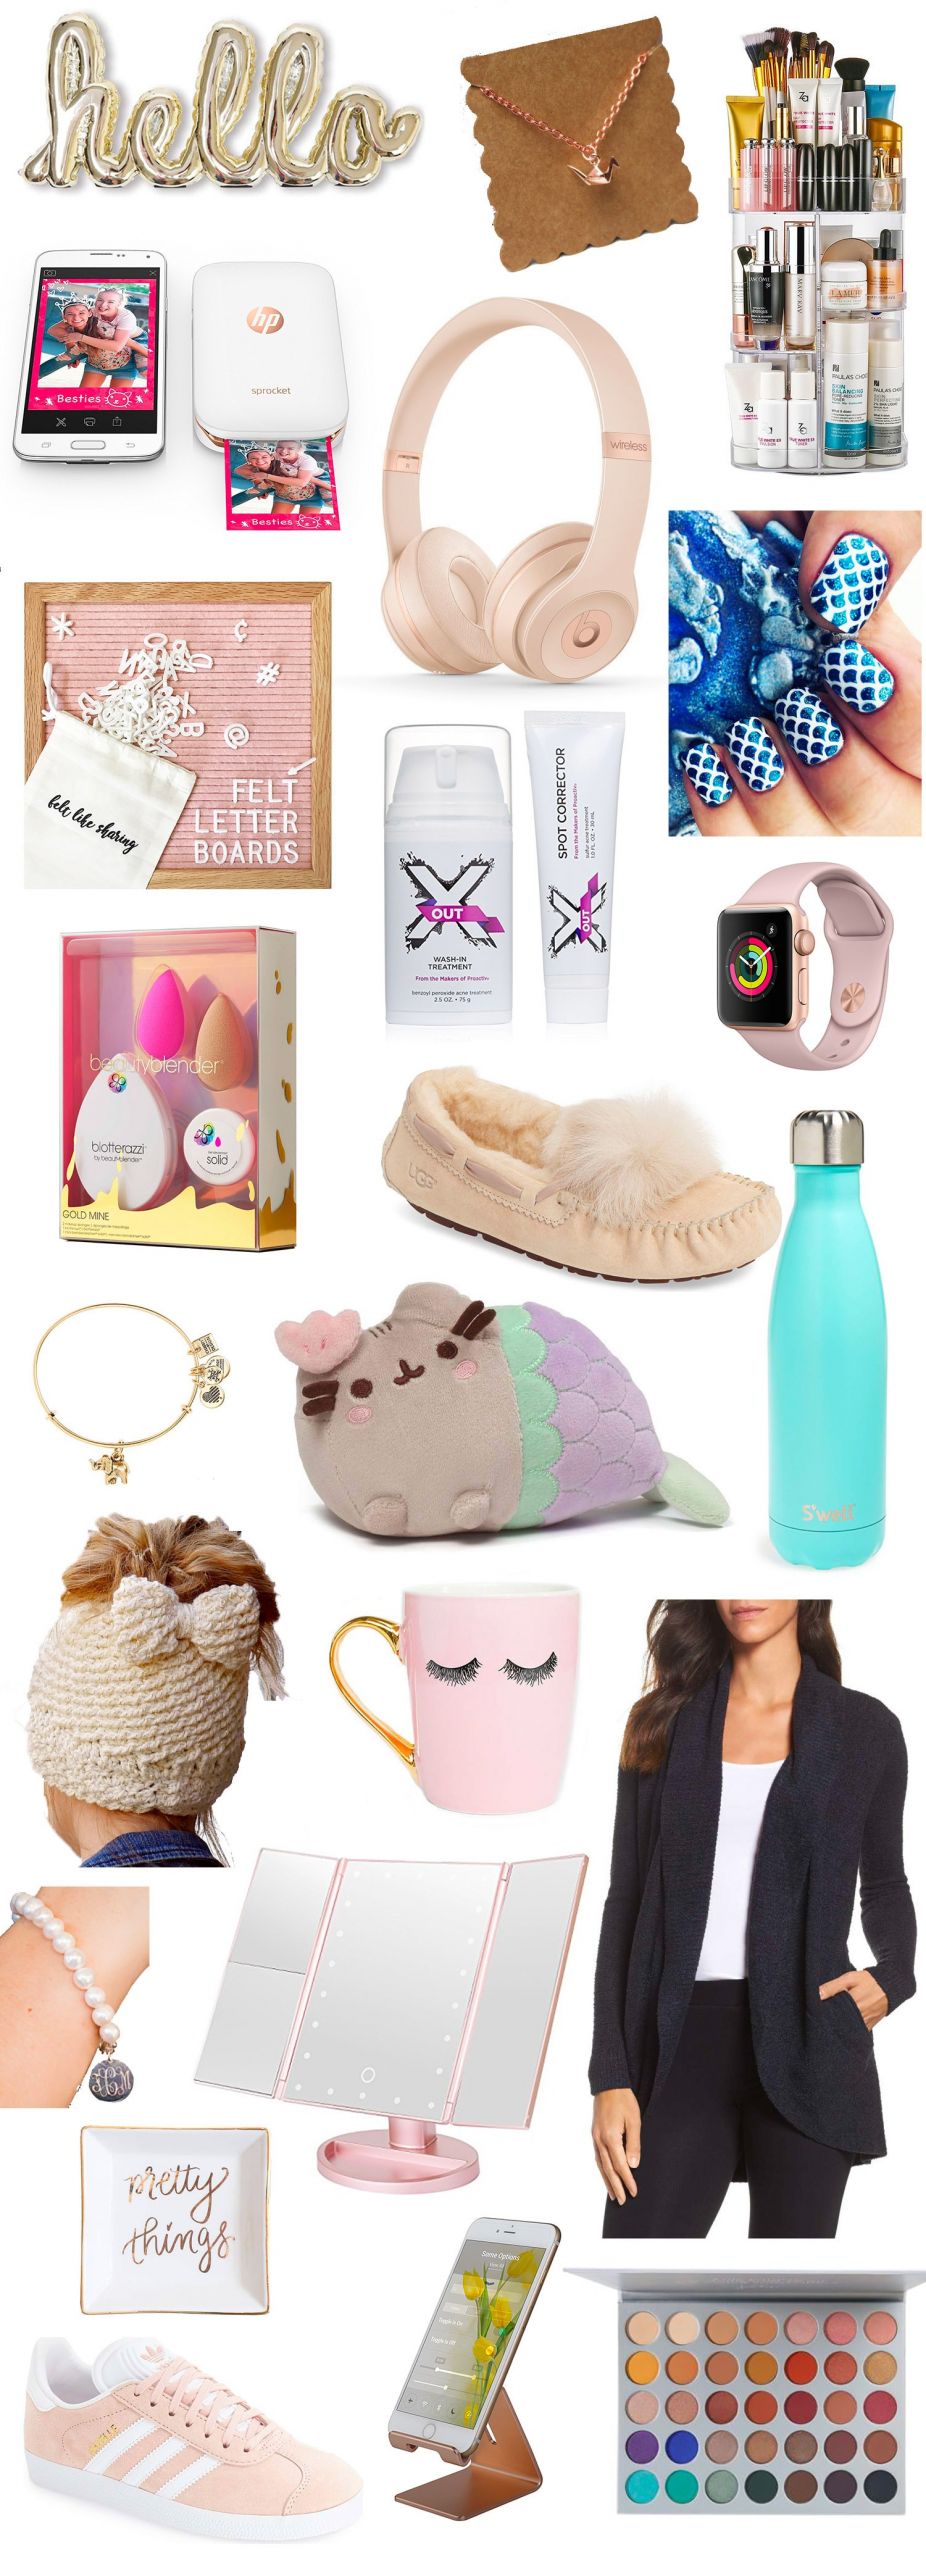 Top Gift Ideas For Teen Girls
 Top Gifts for Teens This Christmas